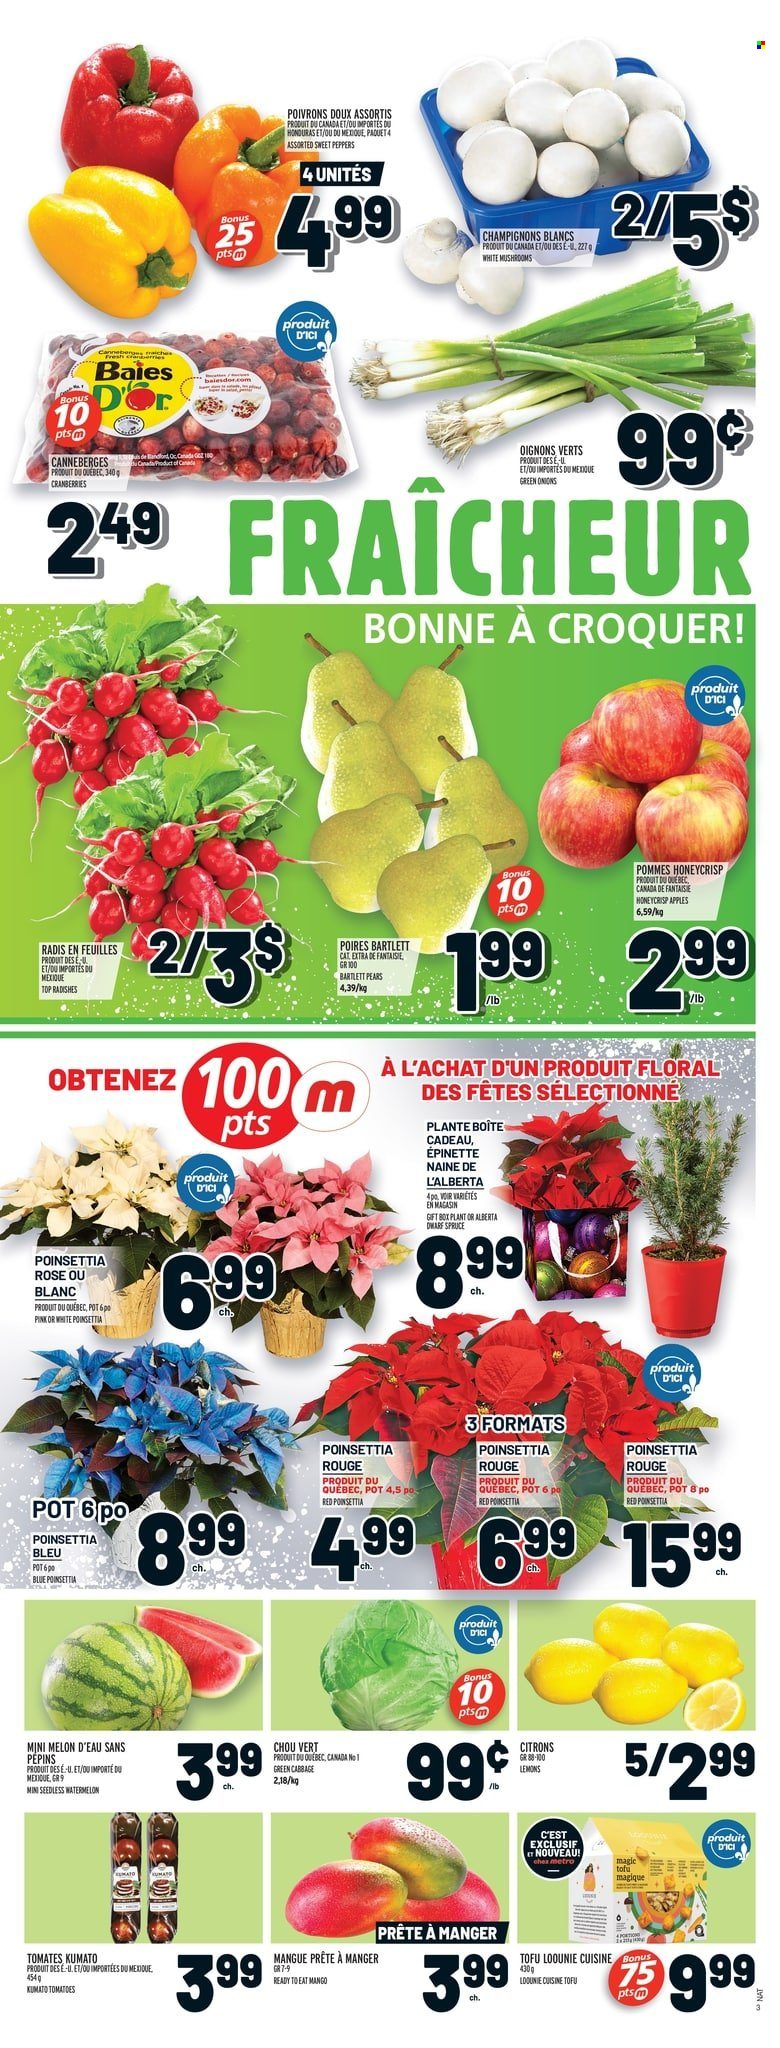 thumbnail - Metro Flyer - November 25, 2021 - December 01, 2021 - Sales products - mushrooms, cabbage, radishes, sweet peppers, tomatoes, peppers, green onion, apples, Bartlett pears, mango, watermelon, pears, melons, lemons, tofu, cranberries, wine, rosé wine, pot, gift box, poinsettia, rose. Page 4.